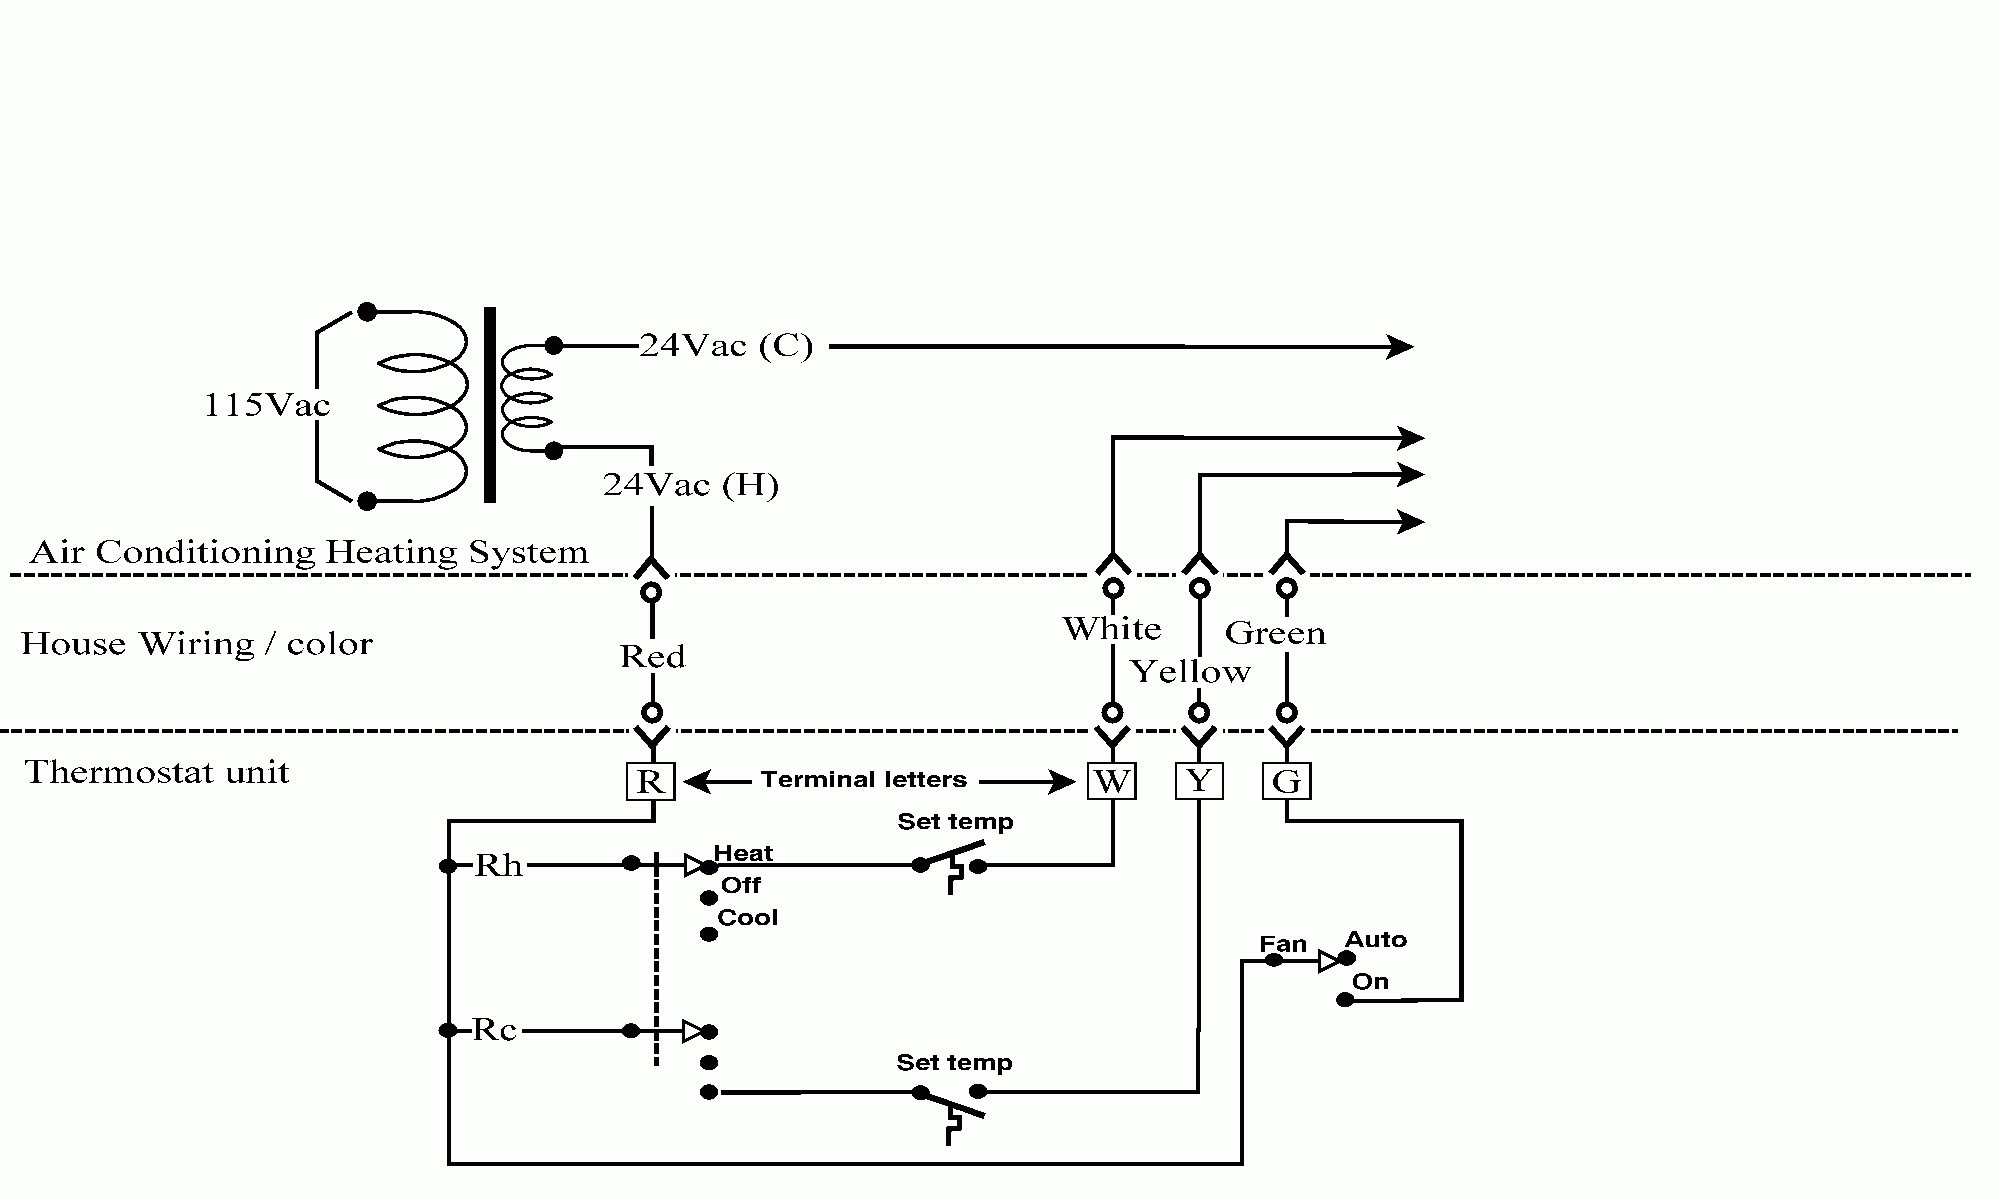 Wiring Diagram Package Ac Refrence Voltas Ac Wiring Diagram & Air Conditioner Wiring Voltas Package Ac